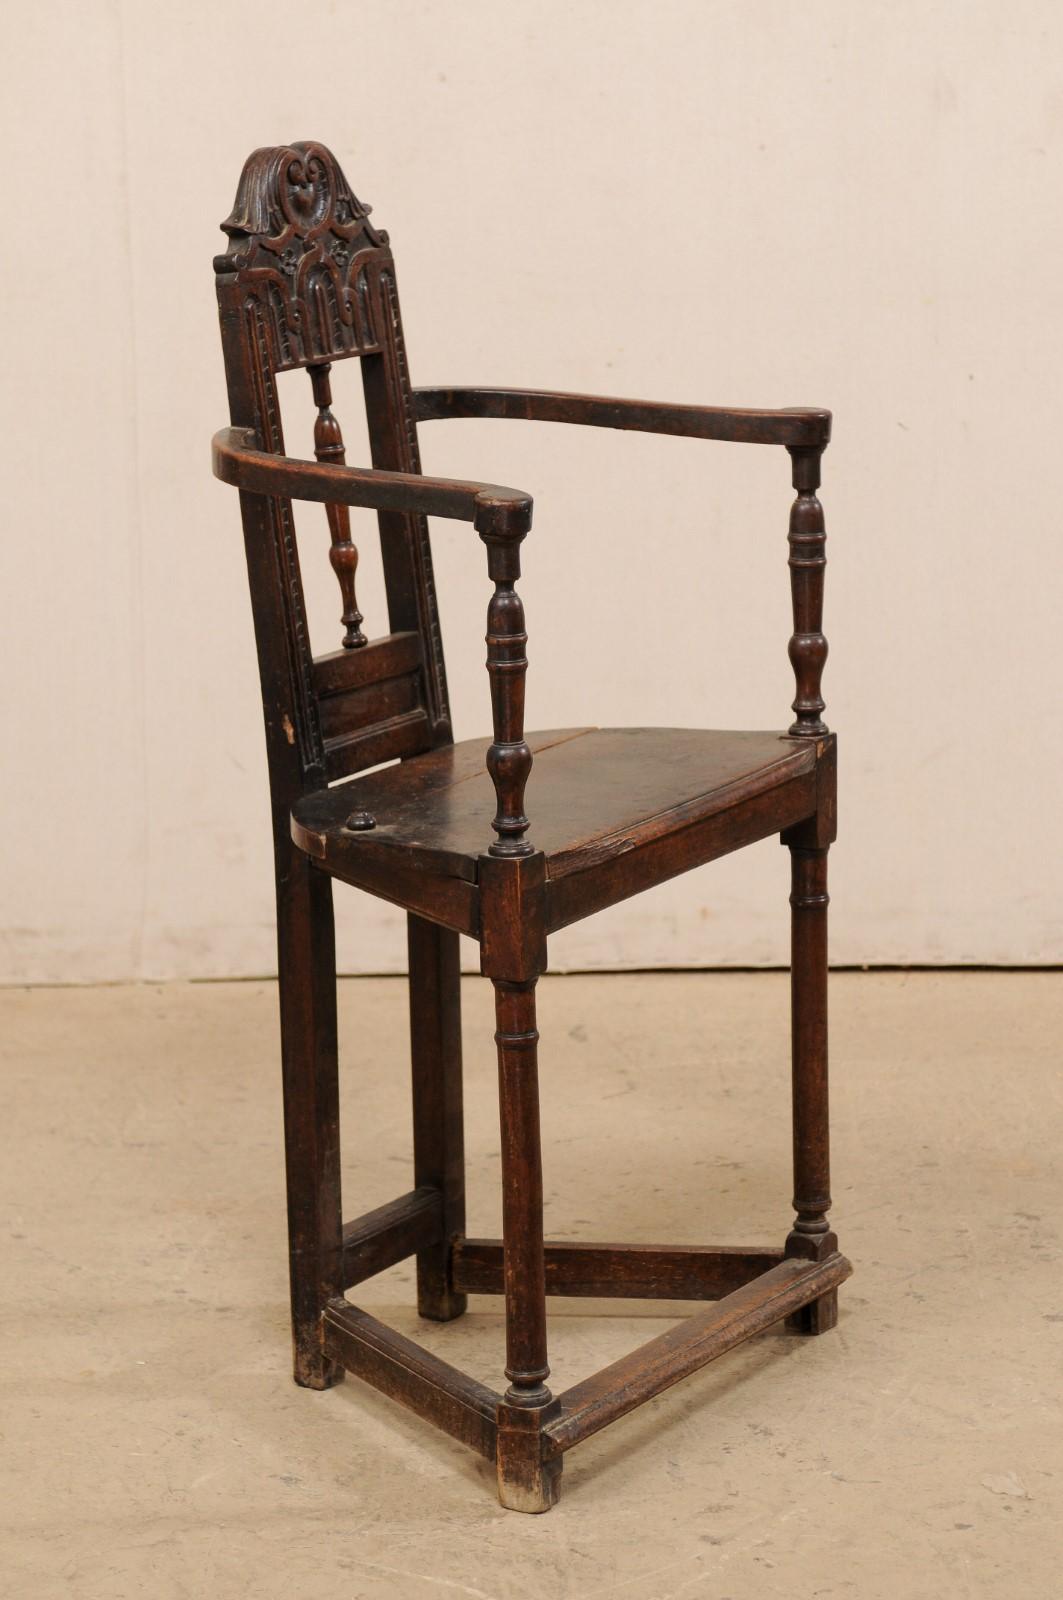 18th Century and Earlier 17th Century Spanish Carved Wood Armchair, Rectangular-Shape for a Room Corner